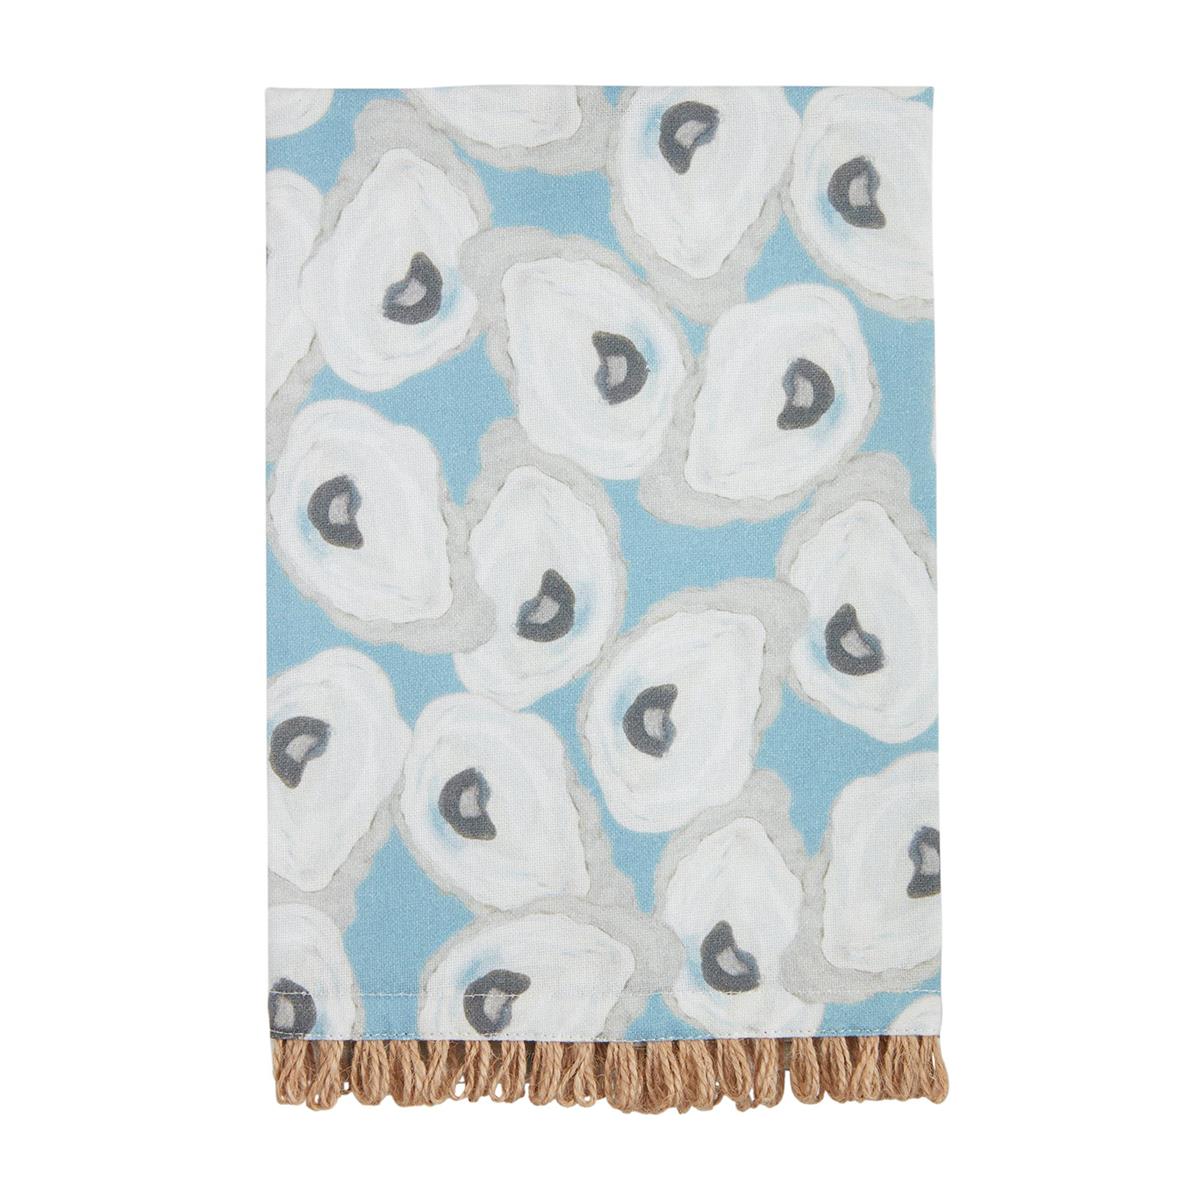 Fringed Repeat Oyster Towel